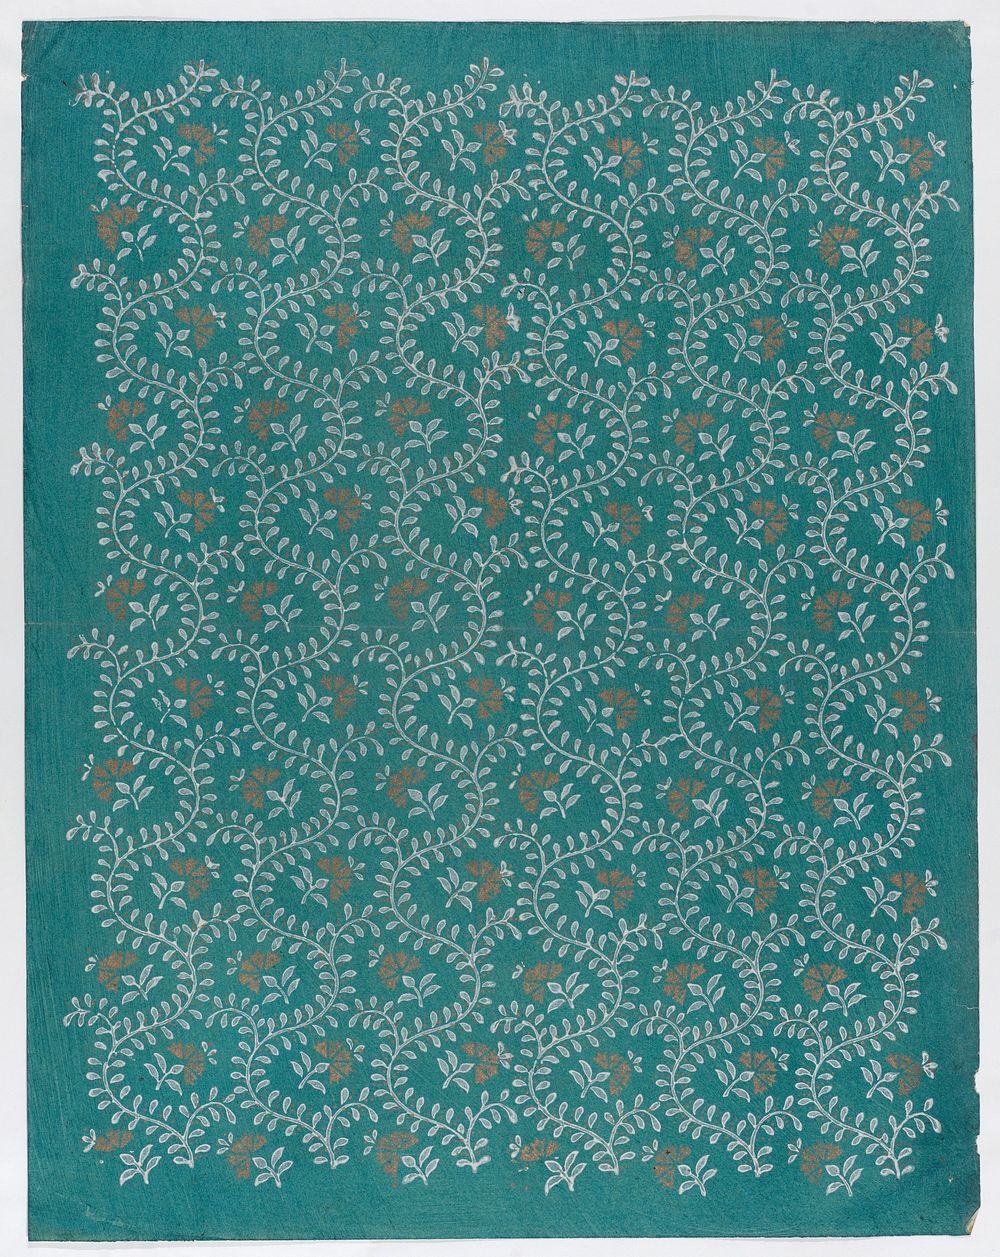 Sheet with meandering vine pattern with gold flowers